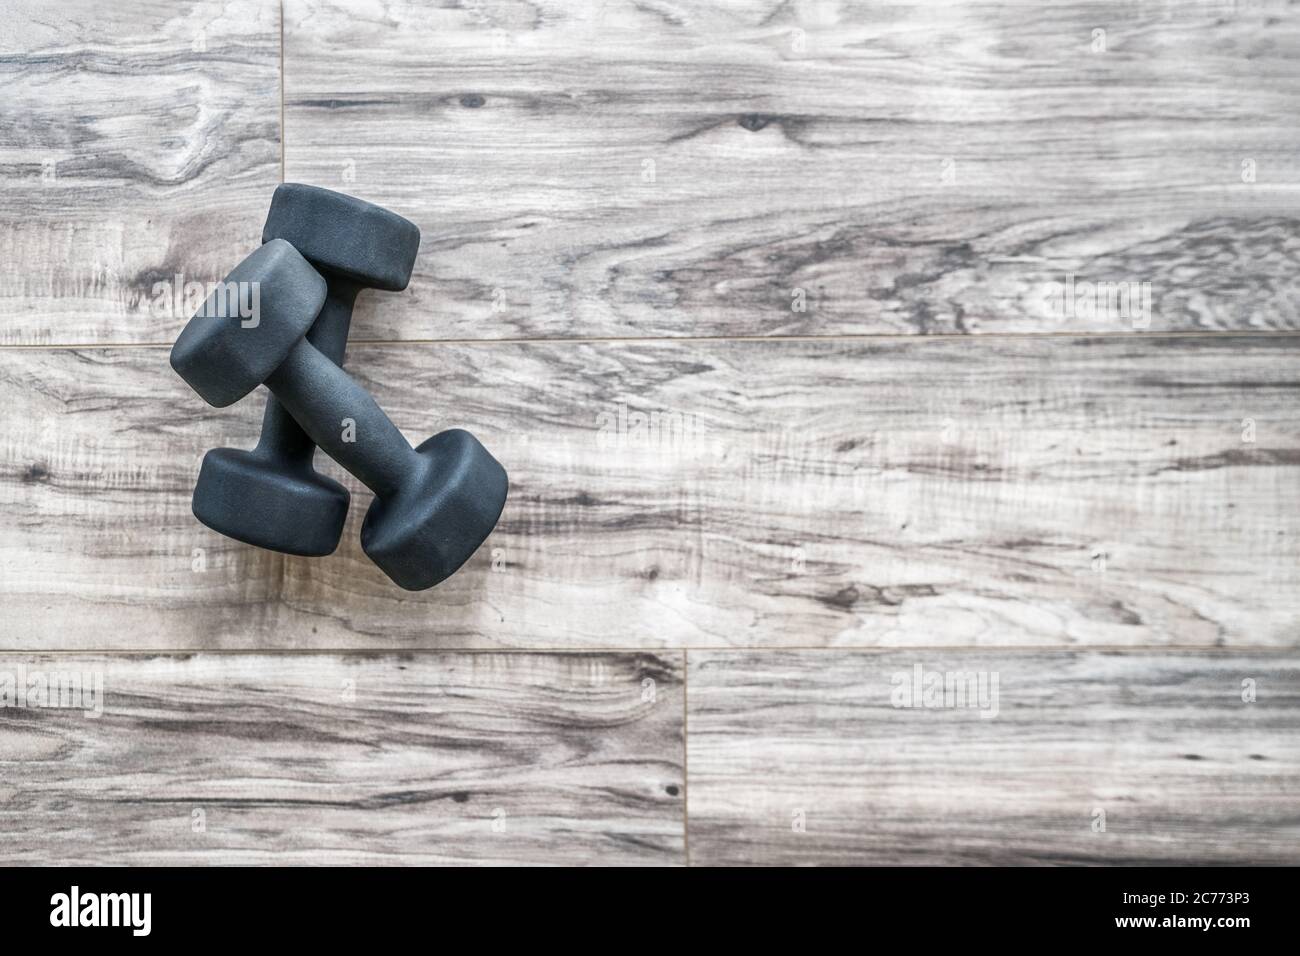 Gym fitness strength training exercise dumbbell free weights top view  wooden background with copy space. Active weight loss lifestyle. Home  workout Stock Photo - Alamy